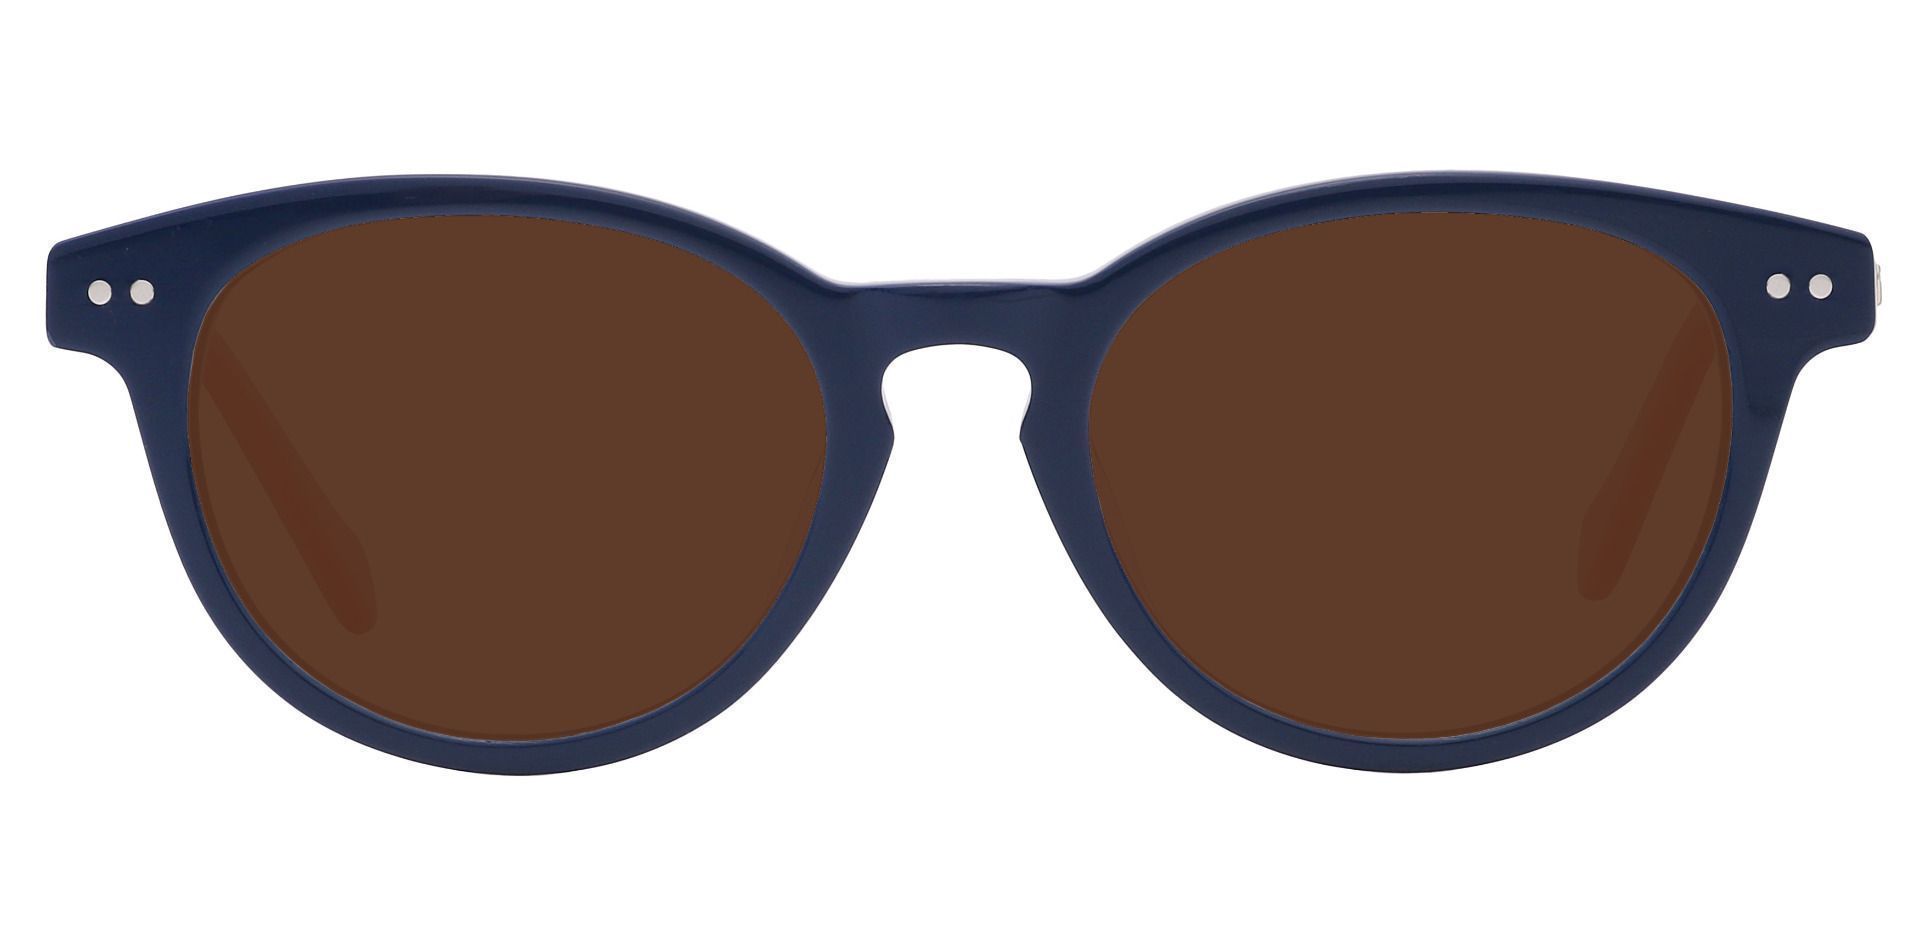 Revere Oval Non-Rx Sunglasses - Blue Frame With Brown Lenses